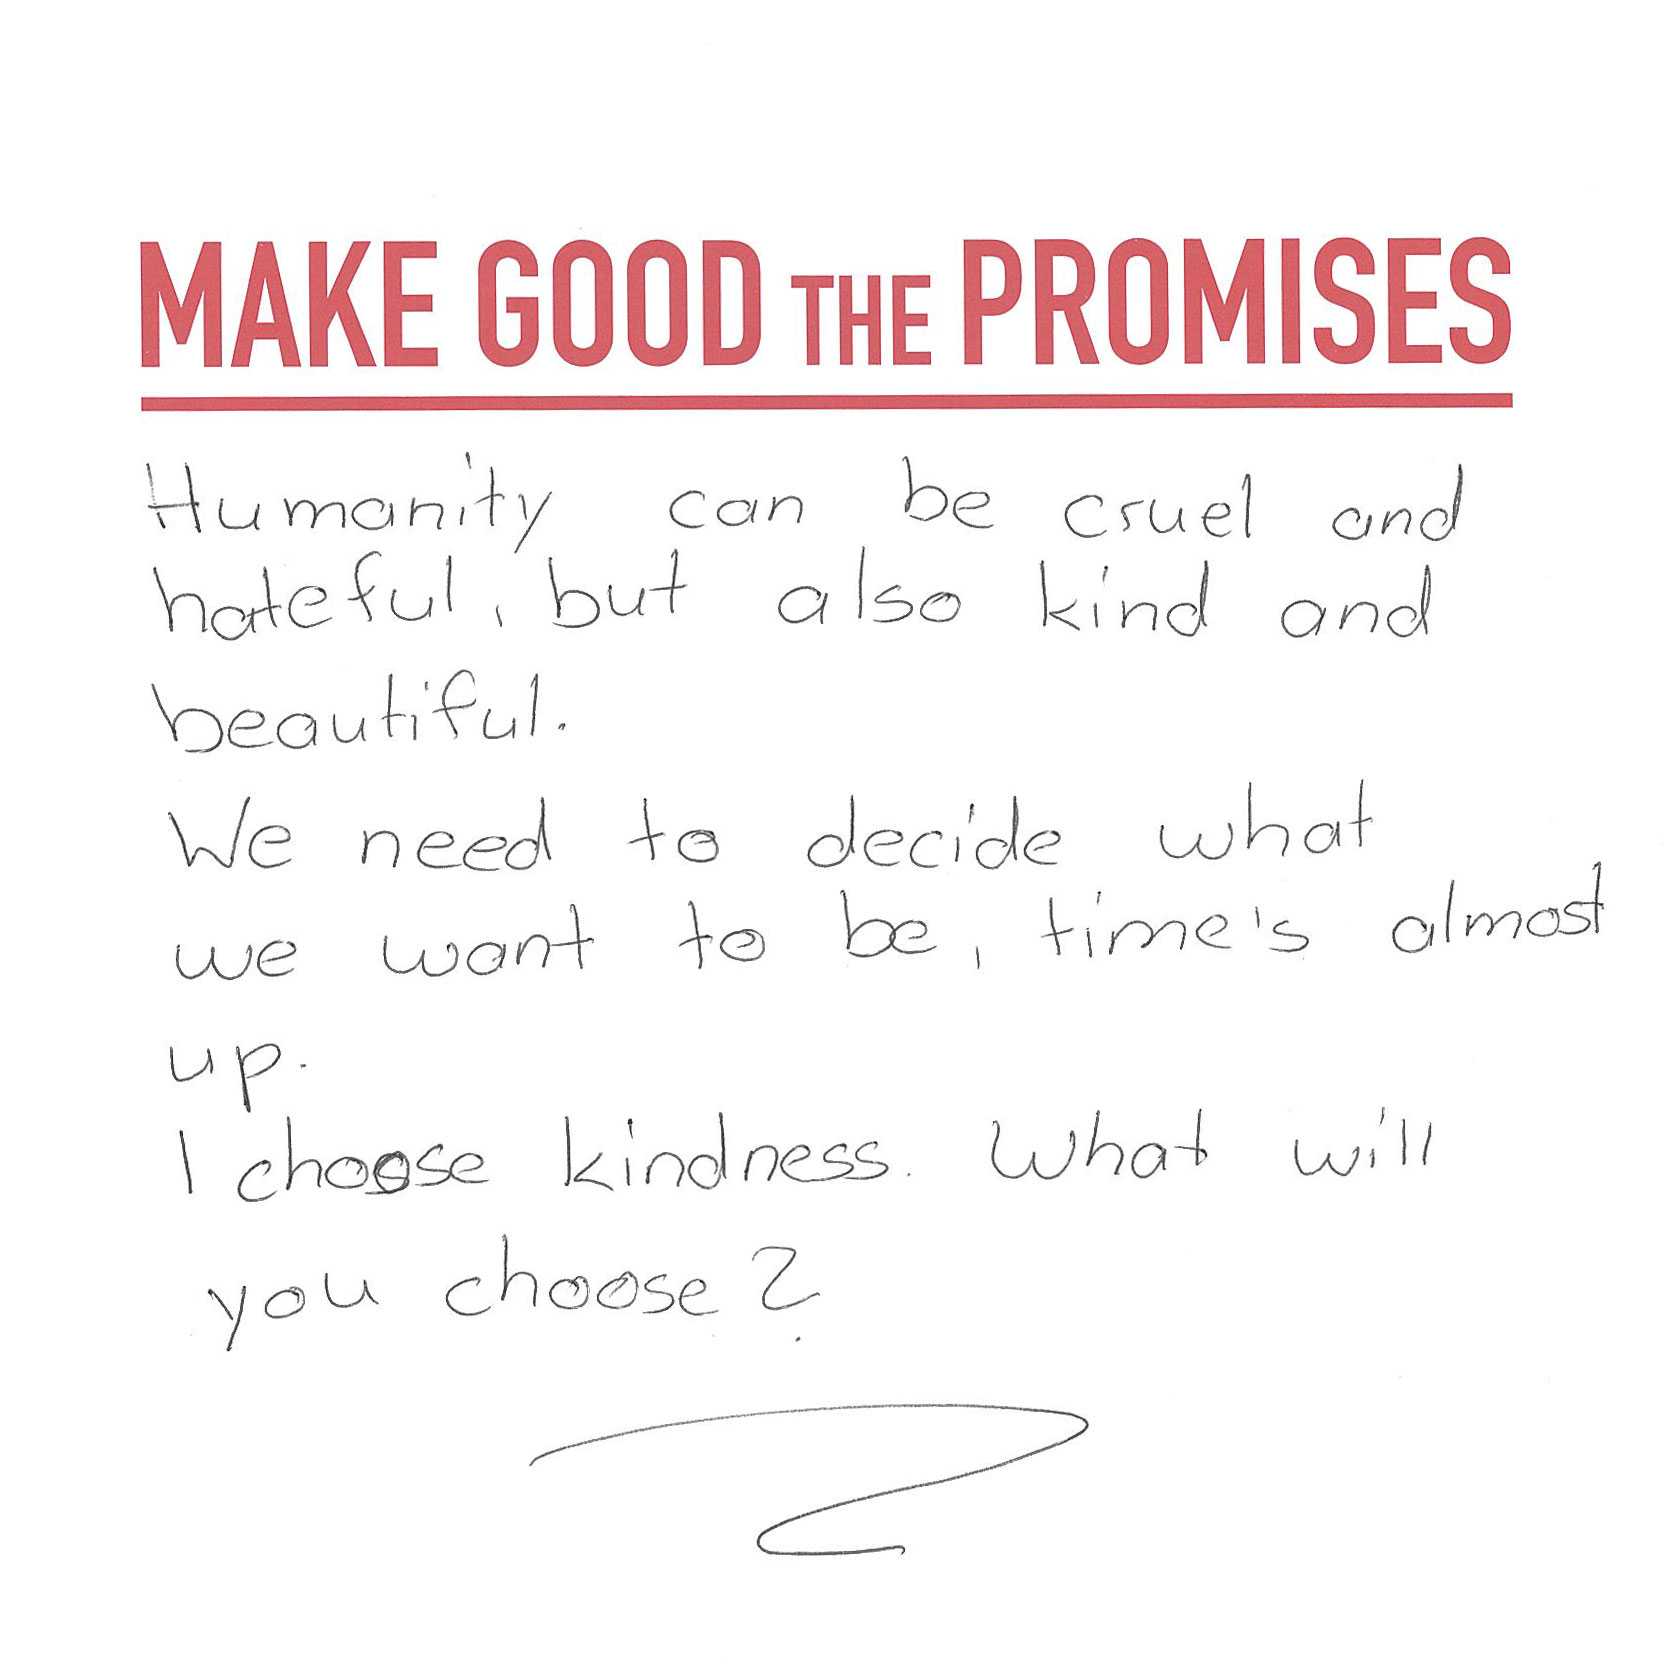 A white card with the handwritten message discussing the importance of humanity and kindness.